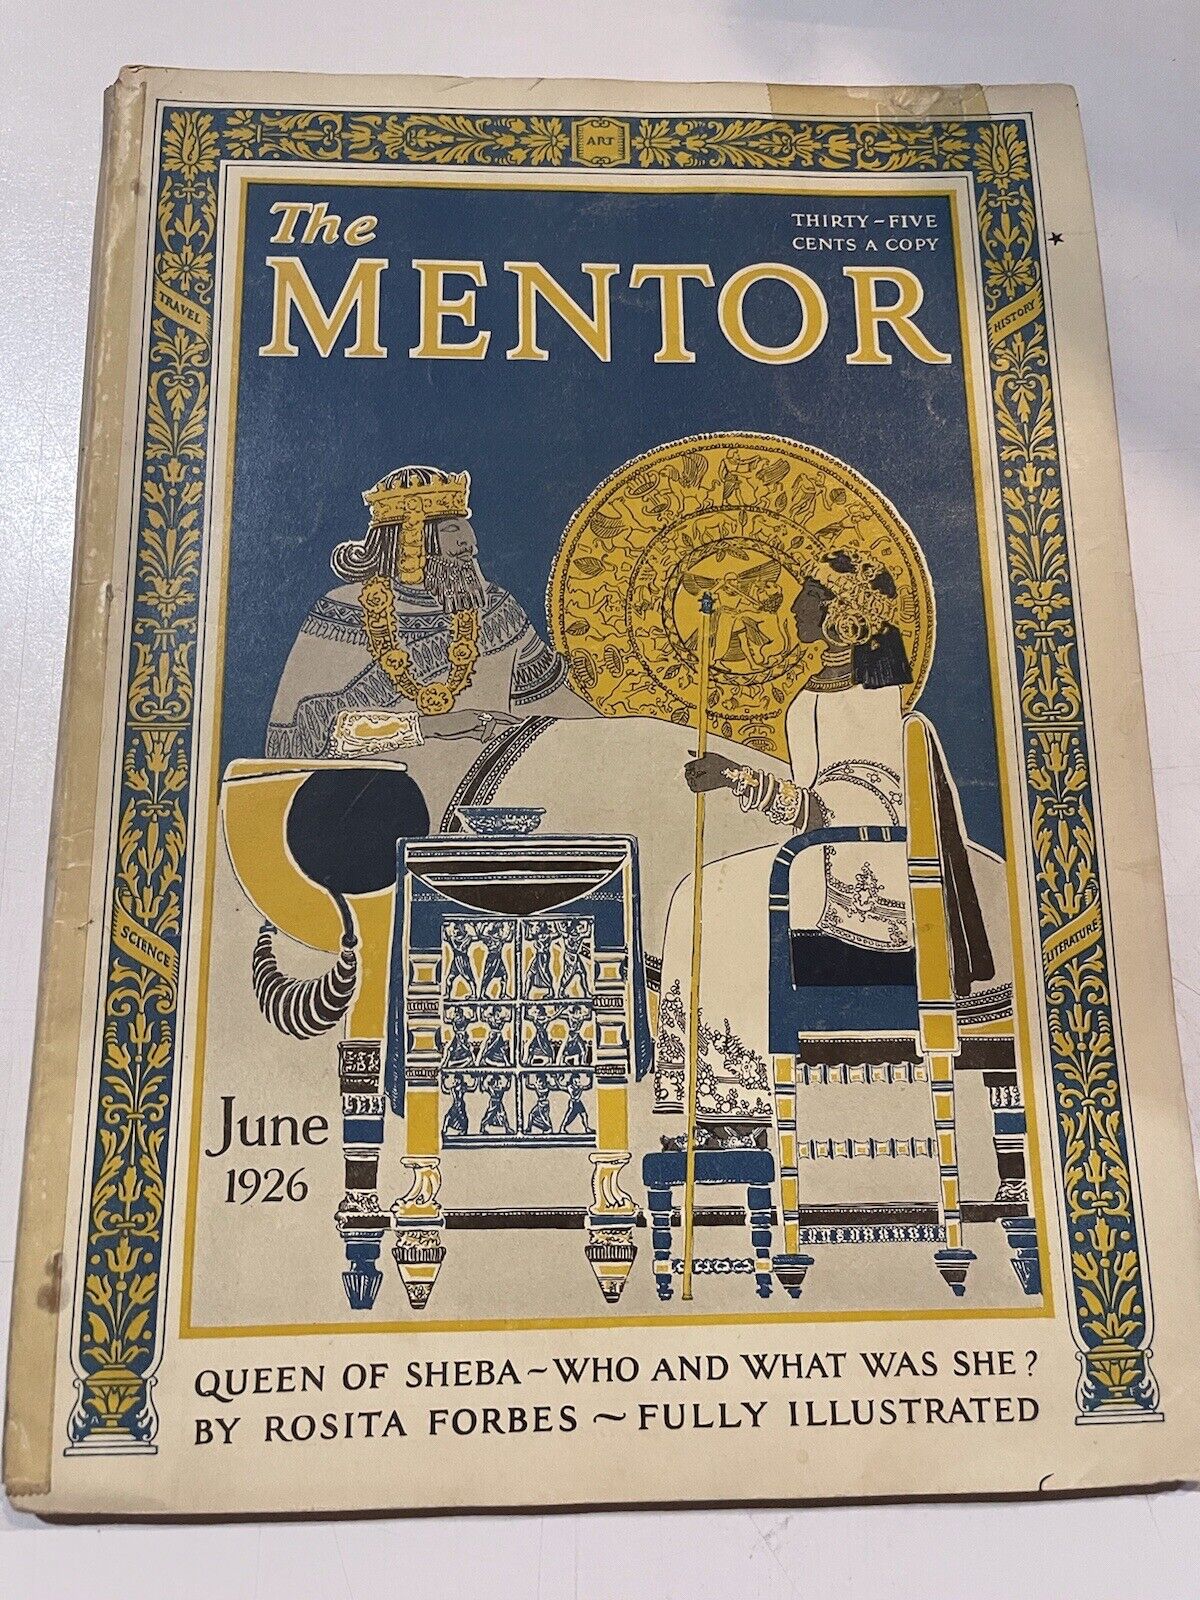 June 1926 The MENTOR EDUCATIONAL MAGAZINE QUEEN of SHEBA WHO & WHAT WAS SHE